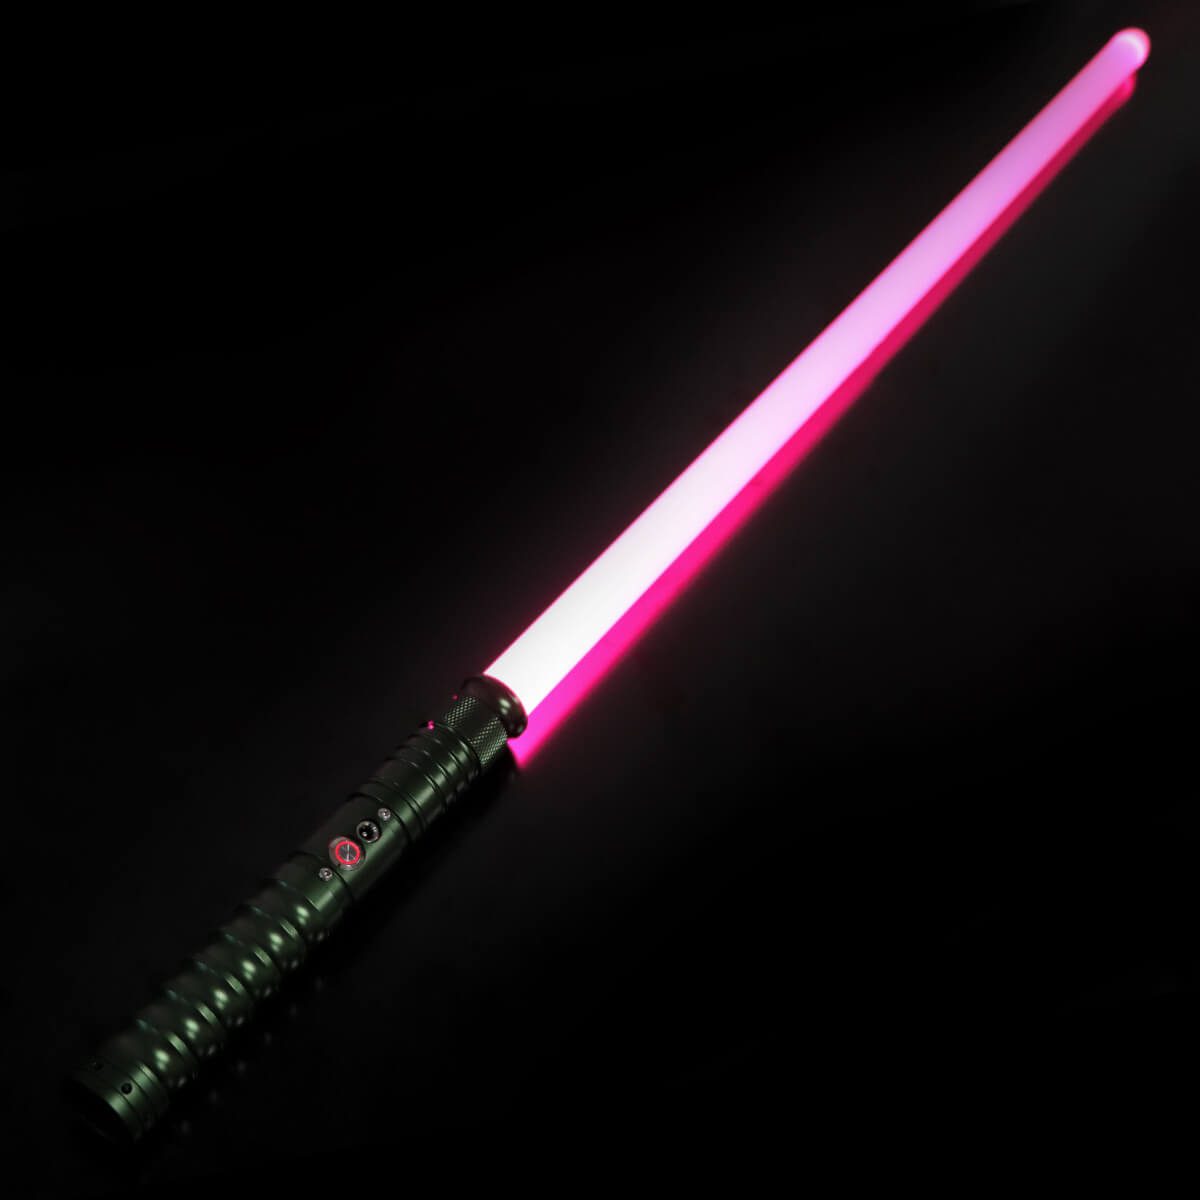 Cheb Lightsaber isabers